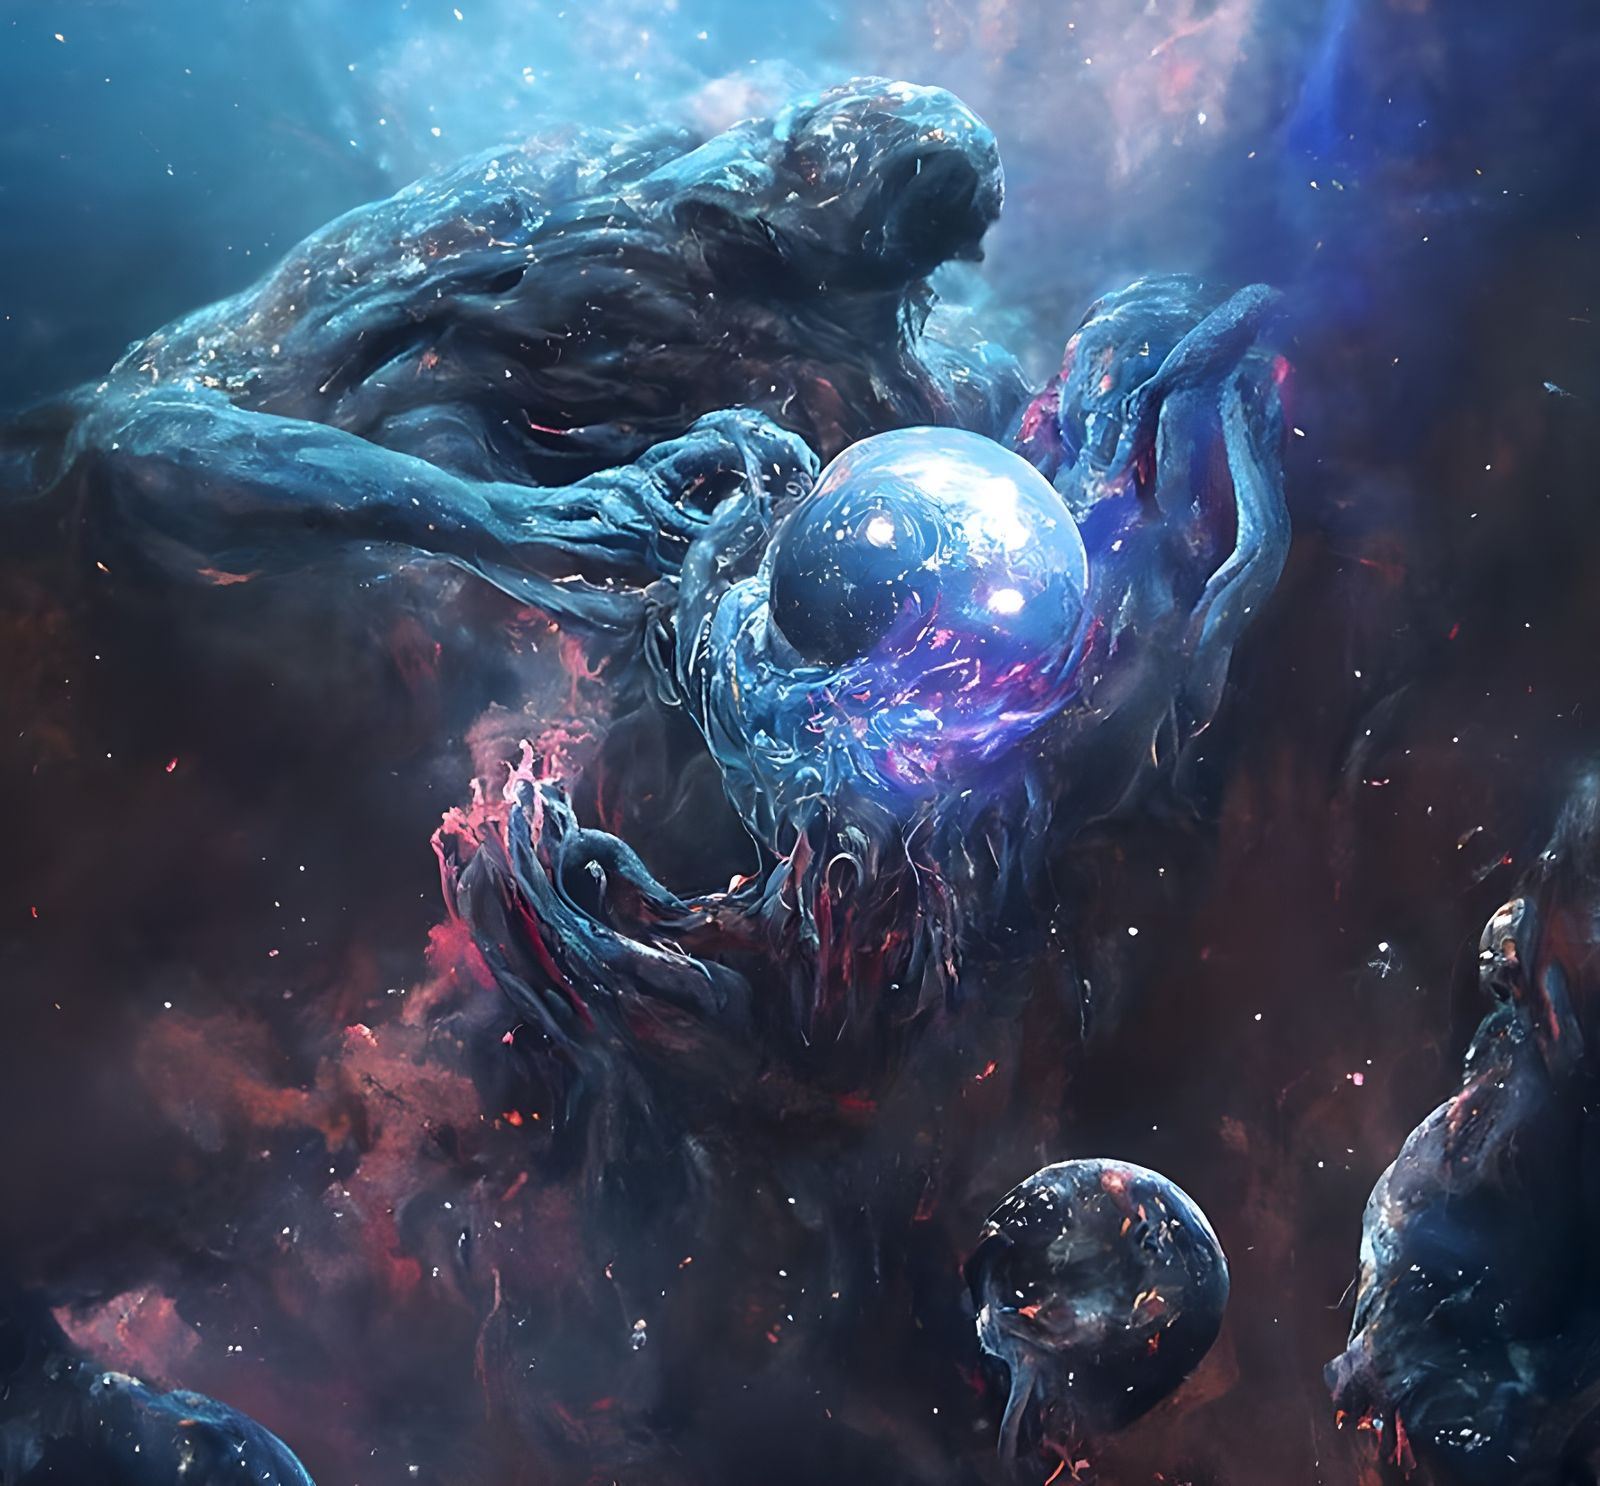 A Cosmic Being Born of Chaos